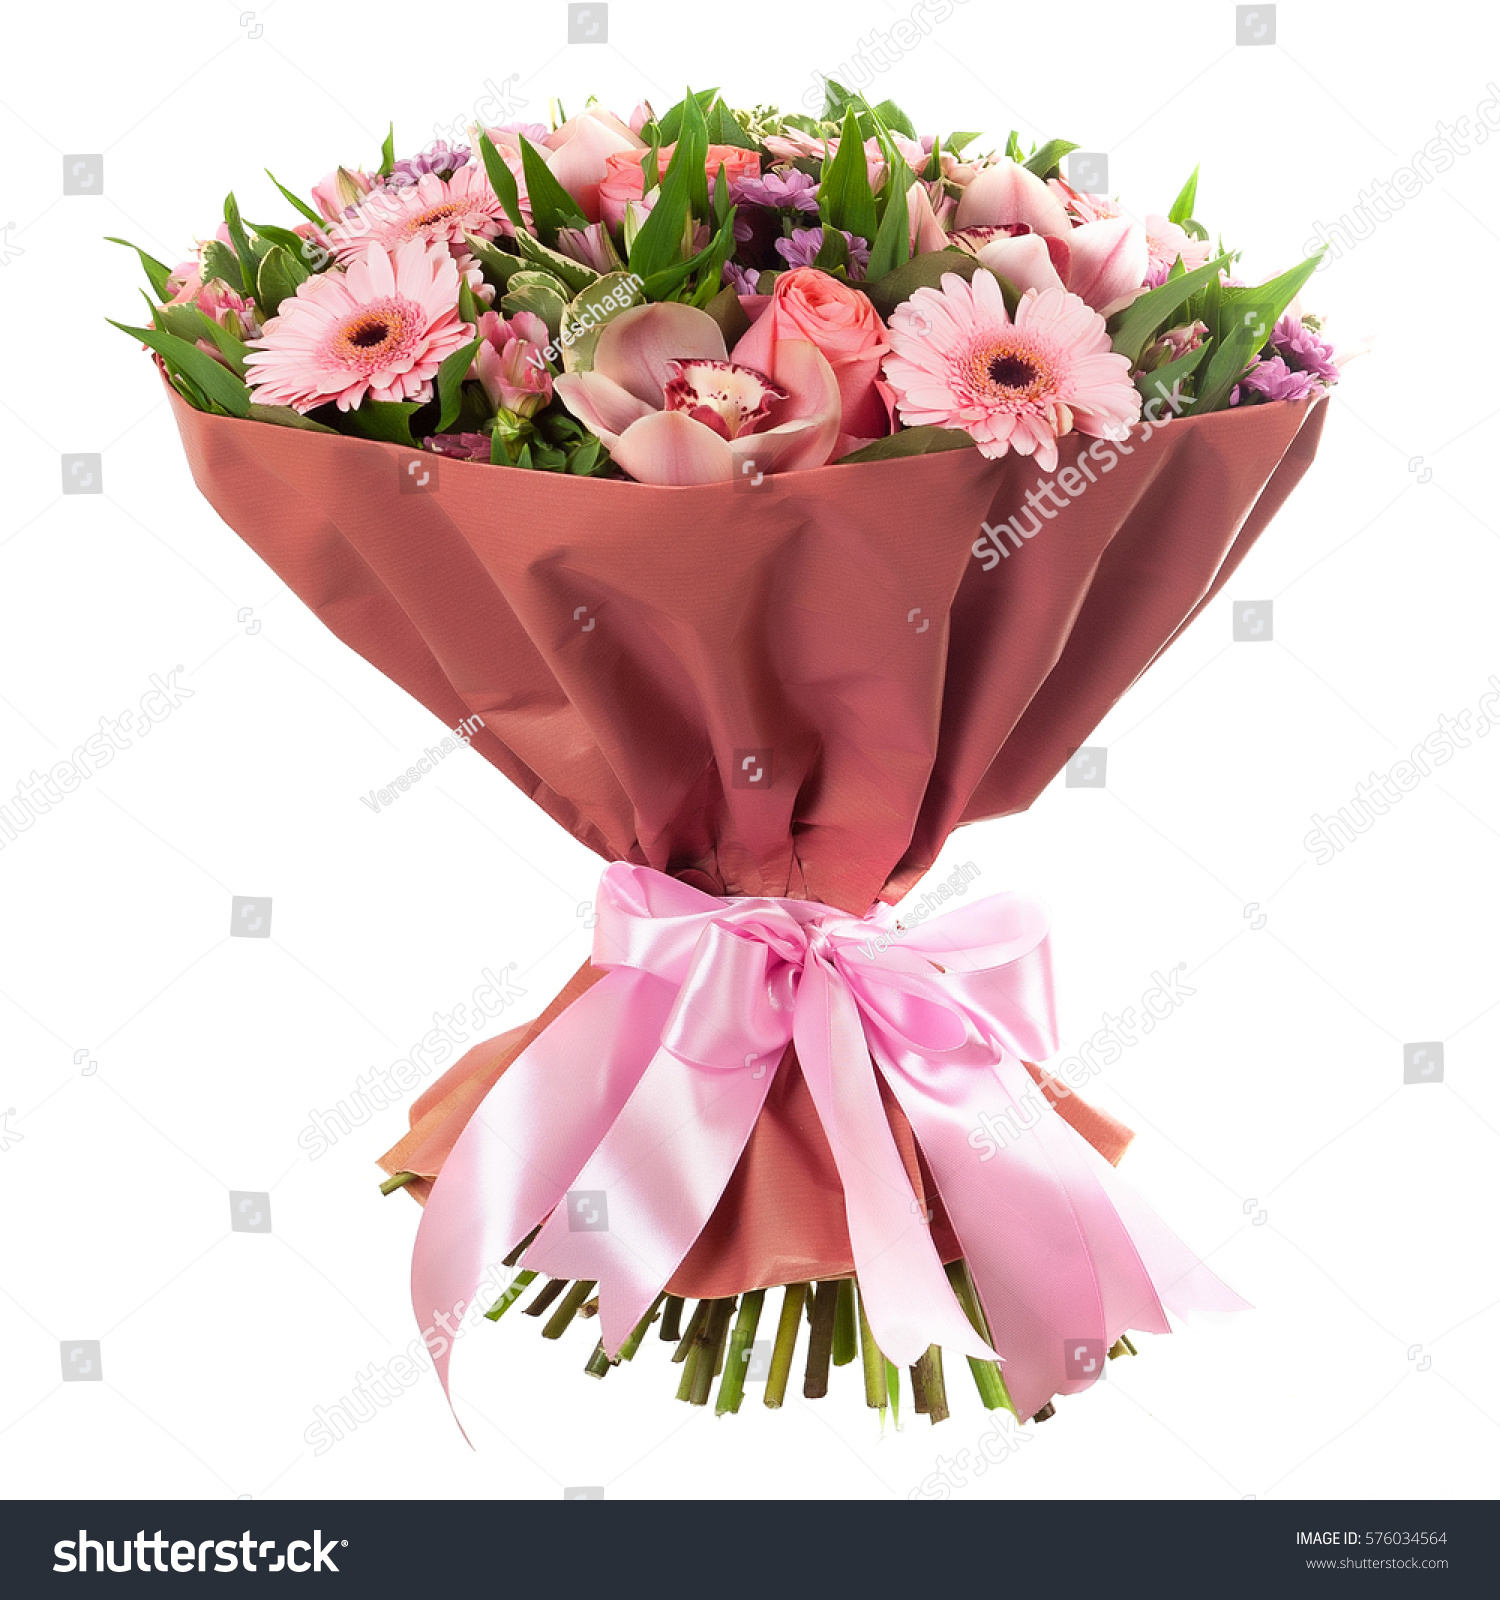 Fresh, lush bouquet of colorful flowers, isolated on white background #576034564